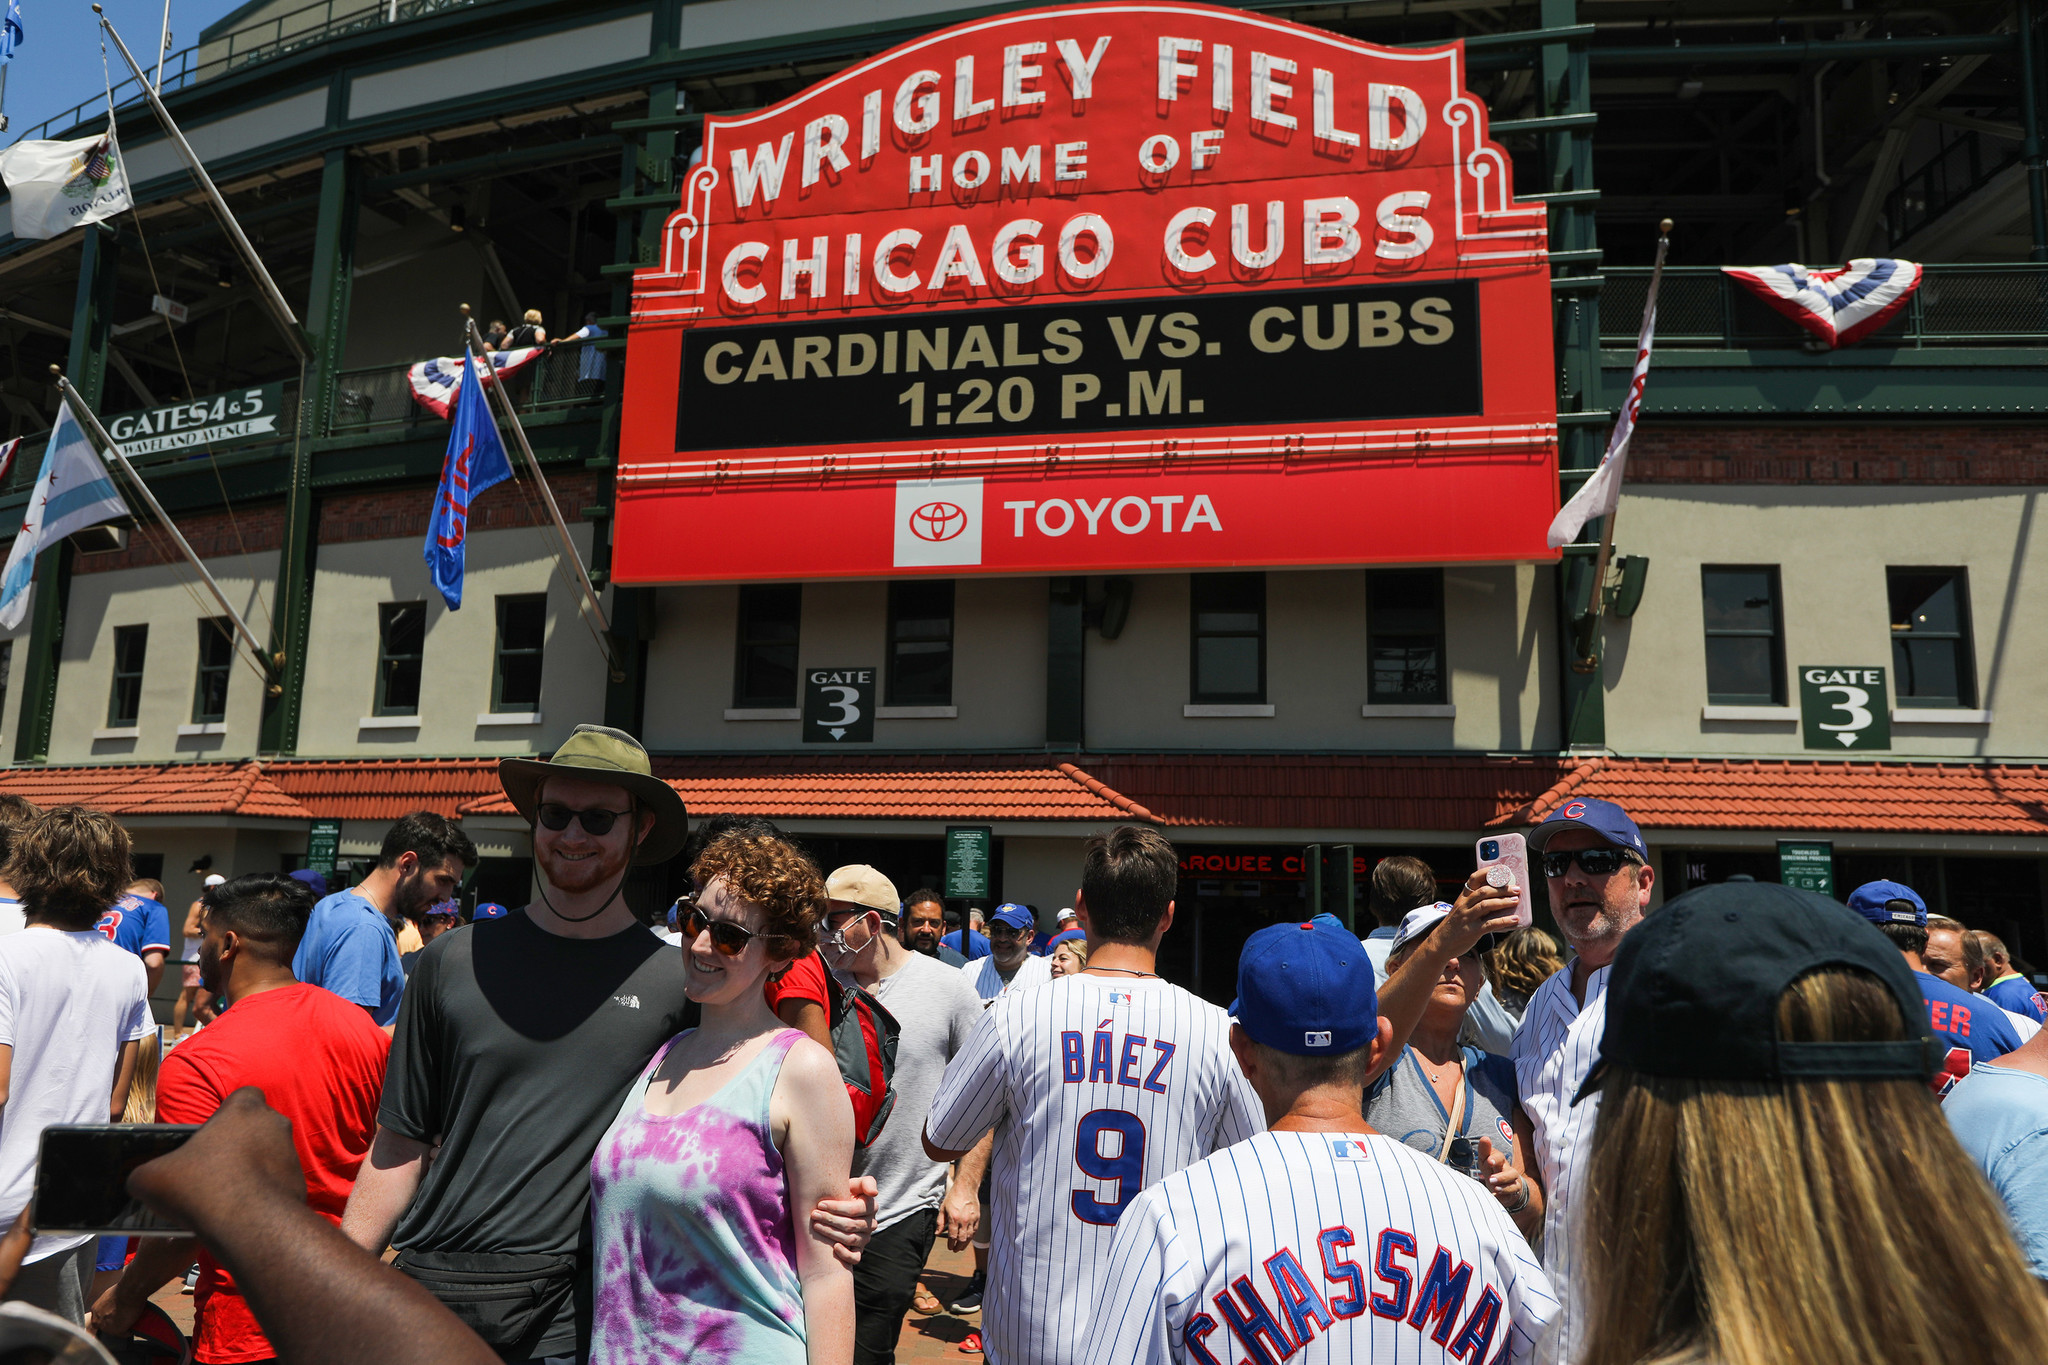 White Sox Fans Are Smarter Than Cubs Fans: Study